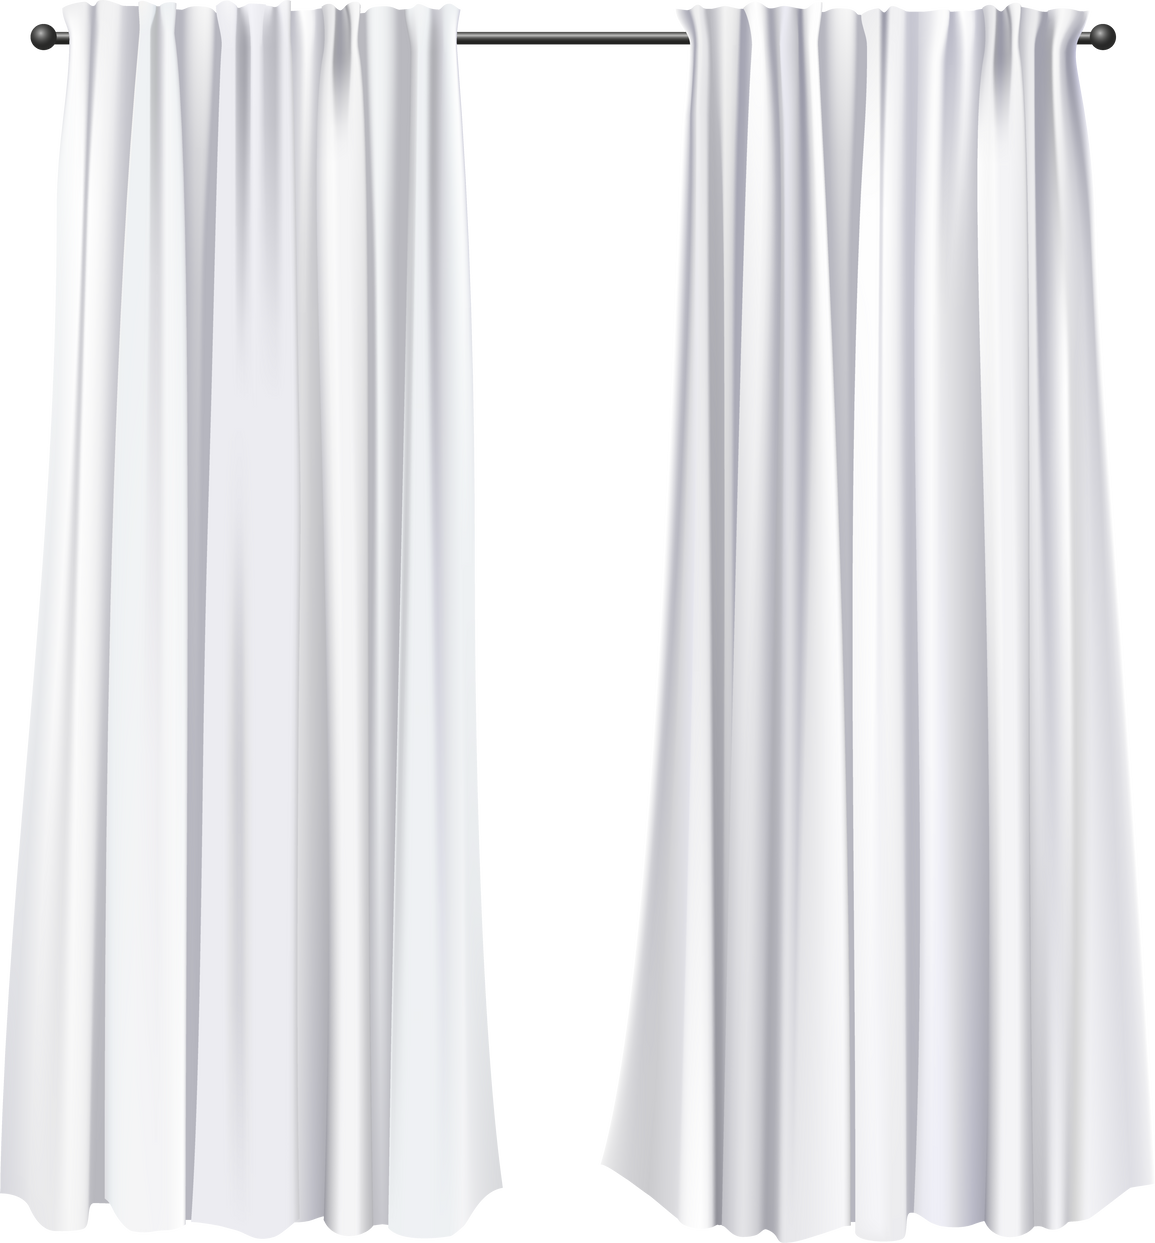 Realistic White Curtains